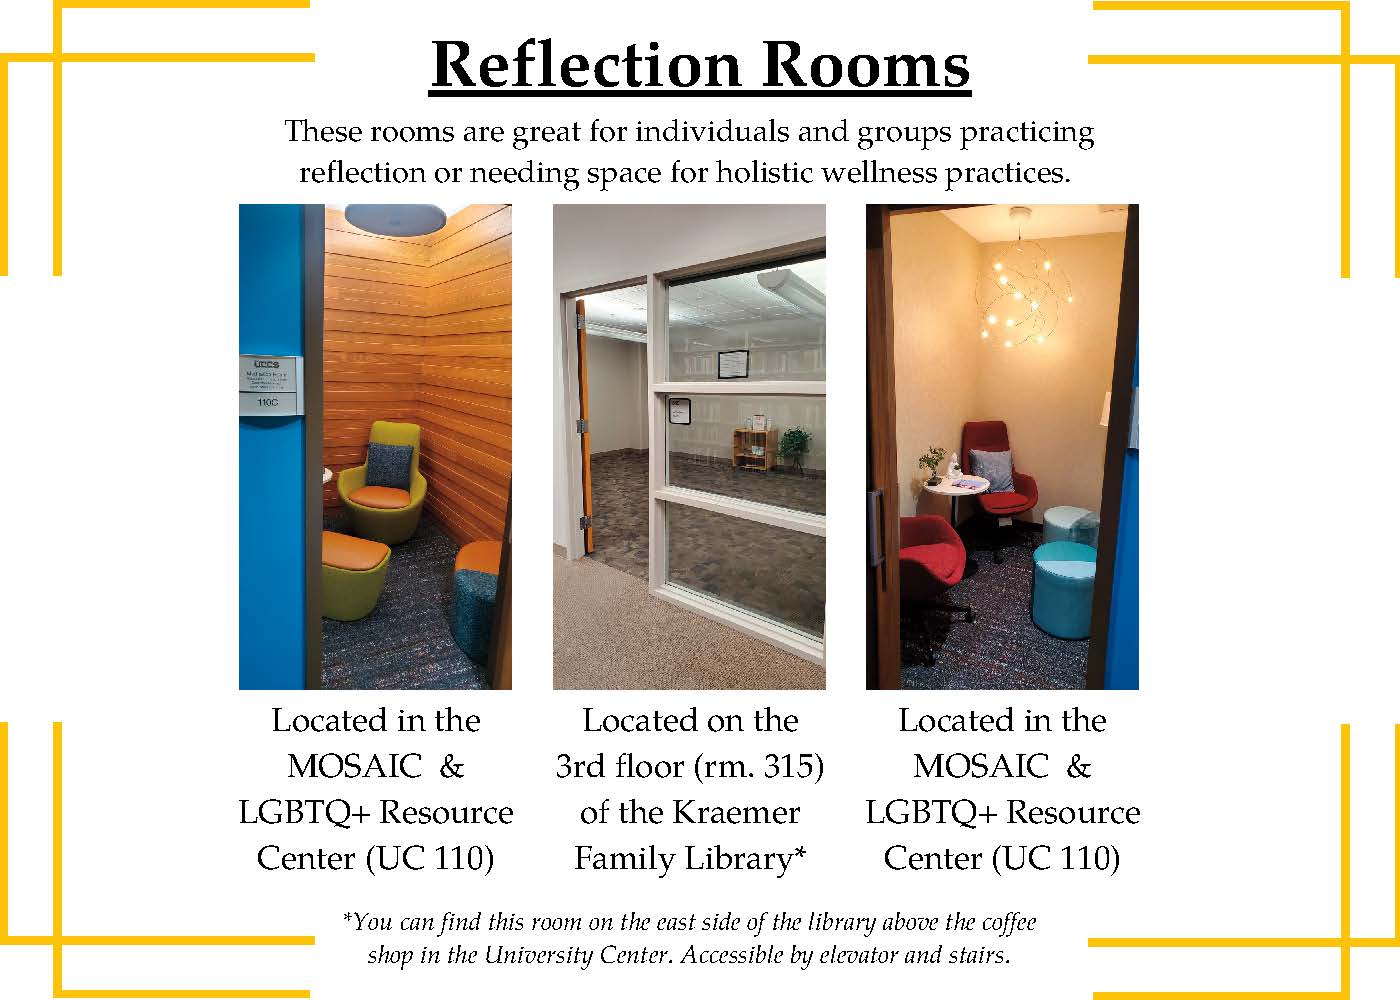 Three images of the UCCS reflection rooms and their locations.